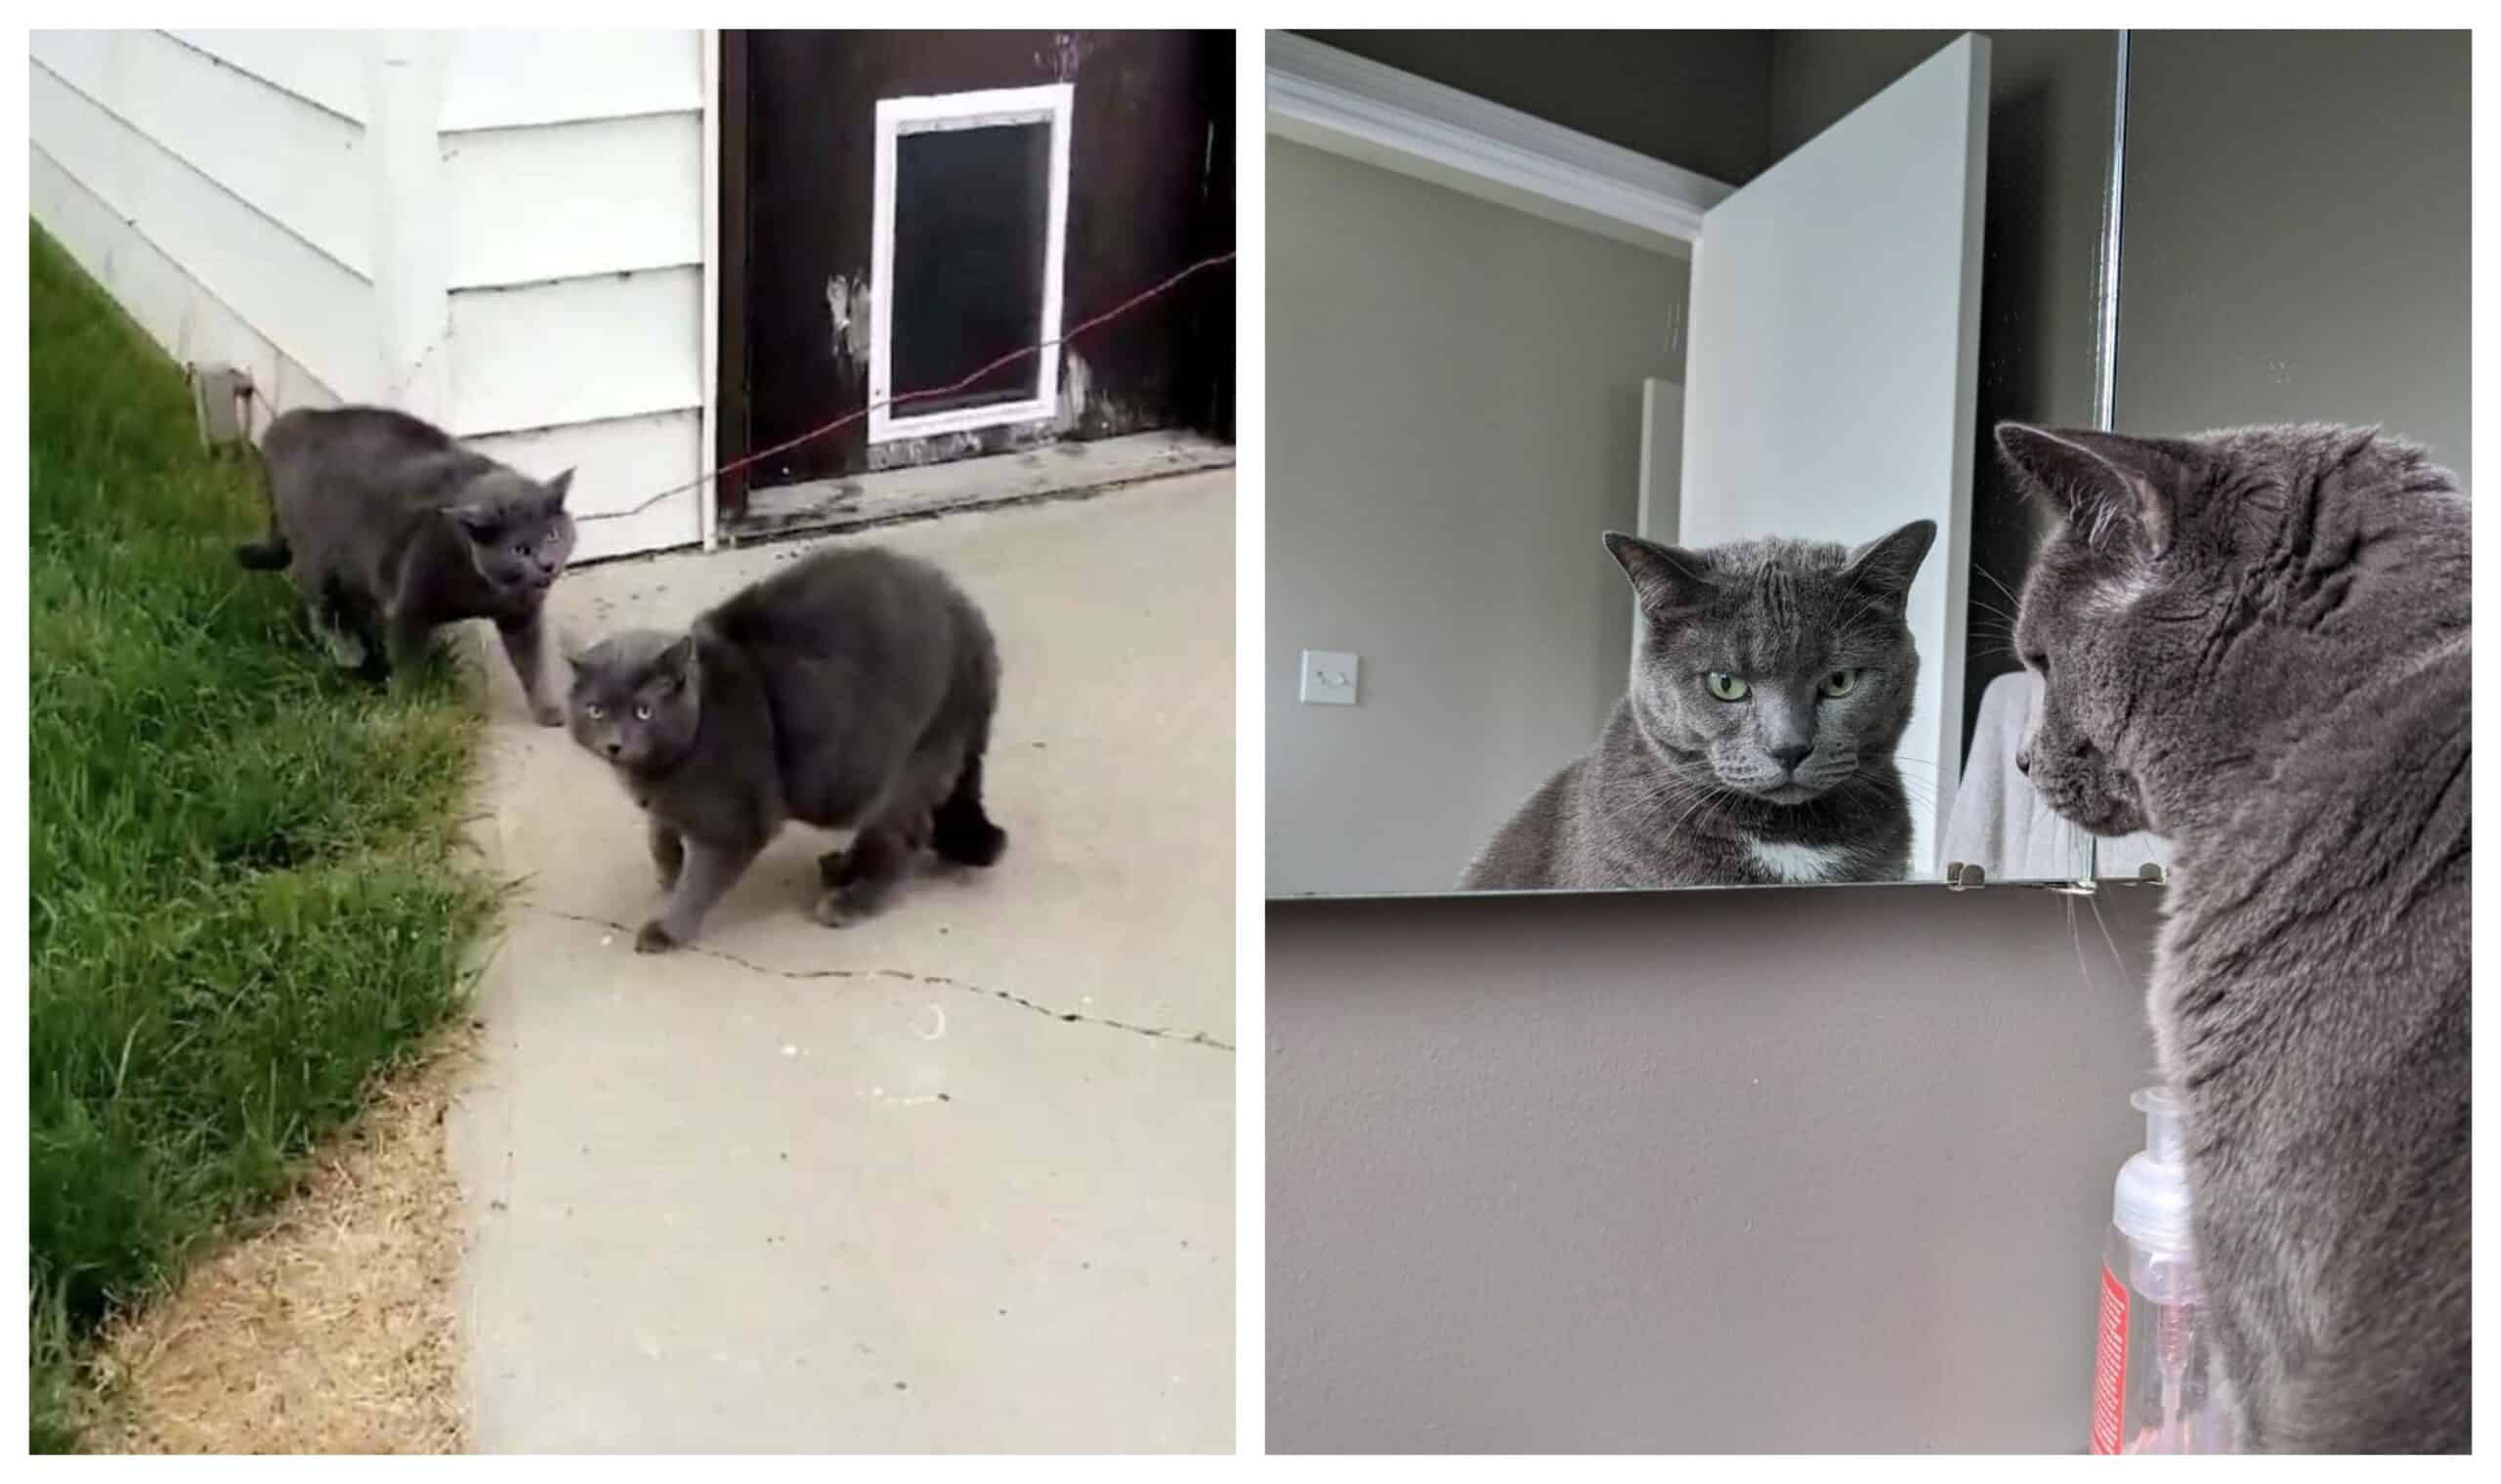 When the woman goes to bring the cat inside, she finds a clone and is unable to tell the difference between them